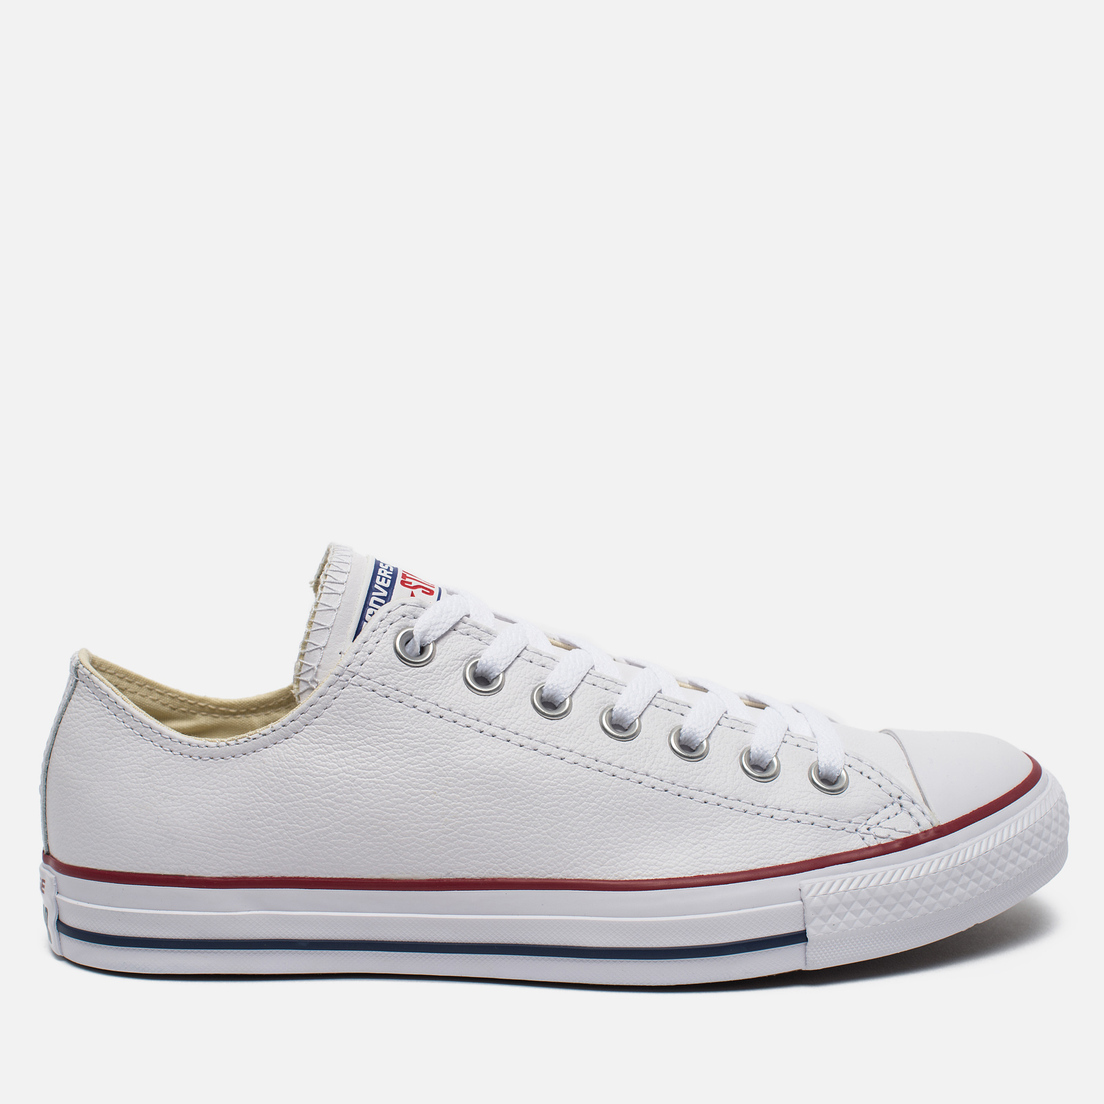 chuck taylor all star leather low